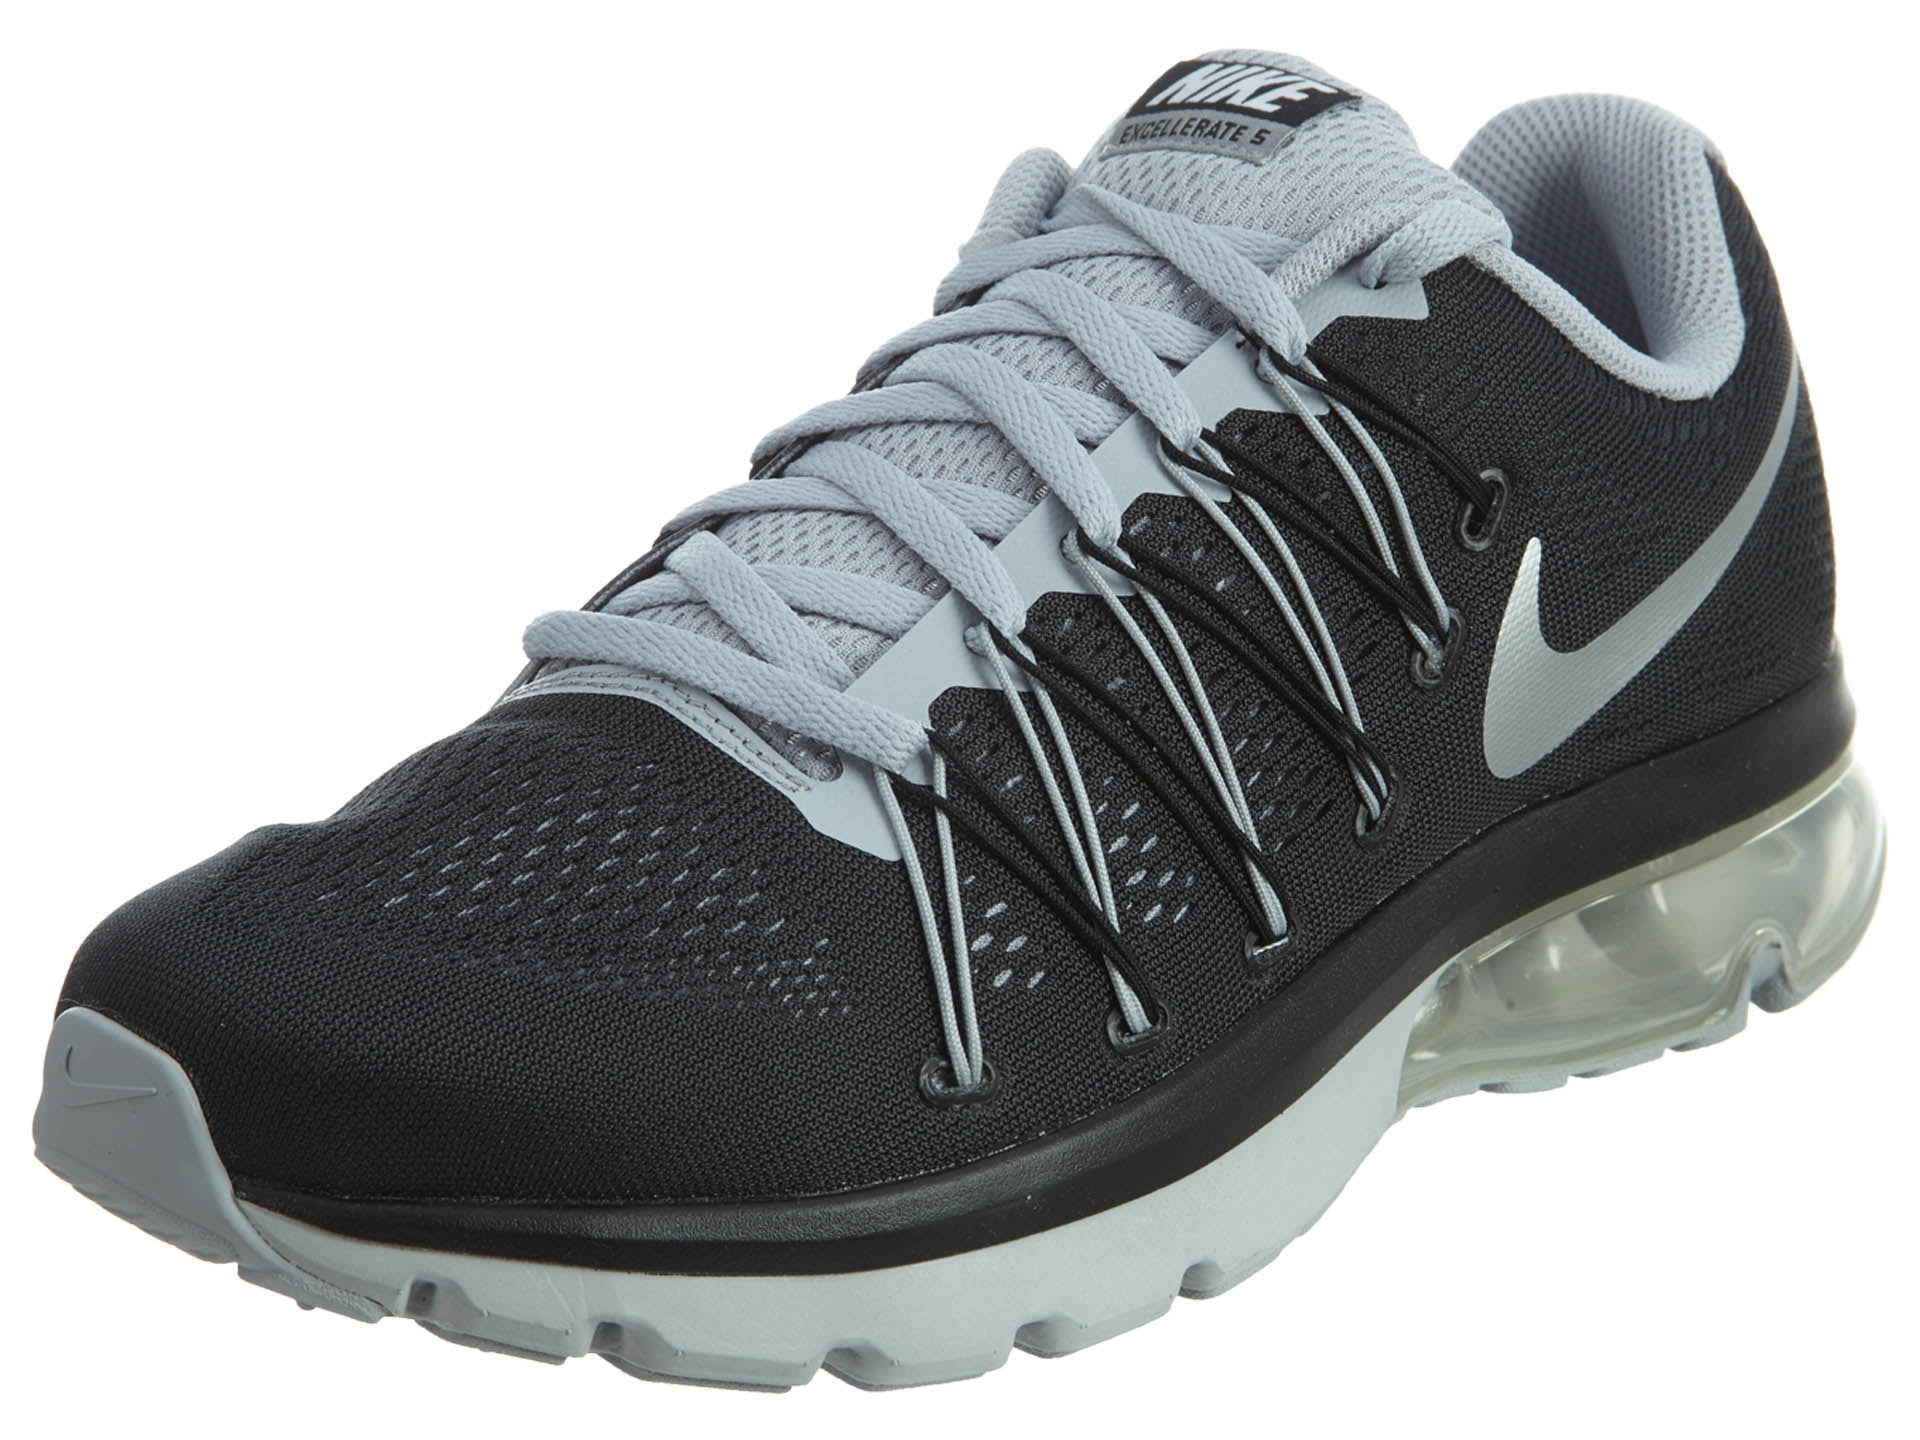 nike air max excellerate women's,Save up to 16%,www.sassycleanersmd.com